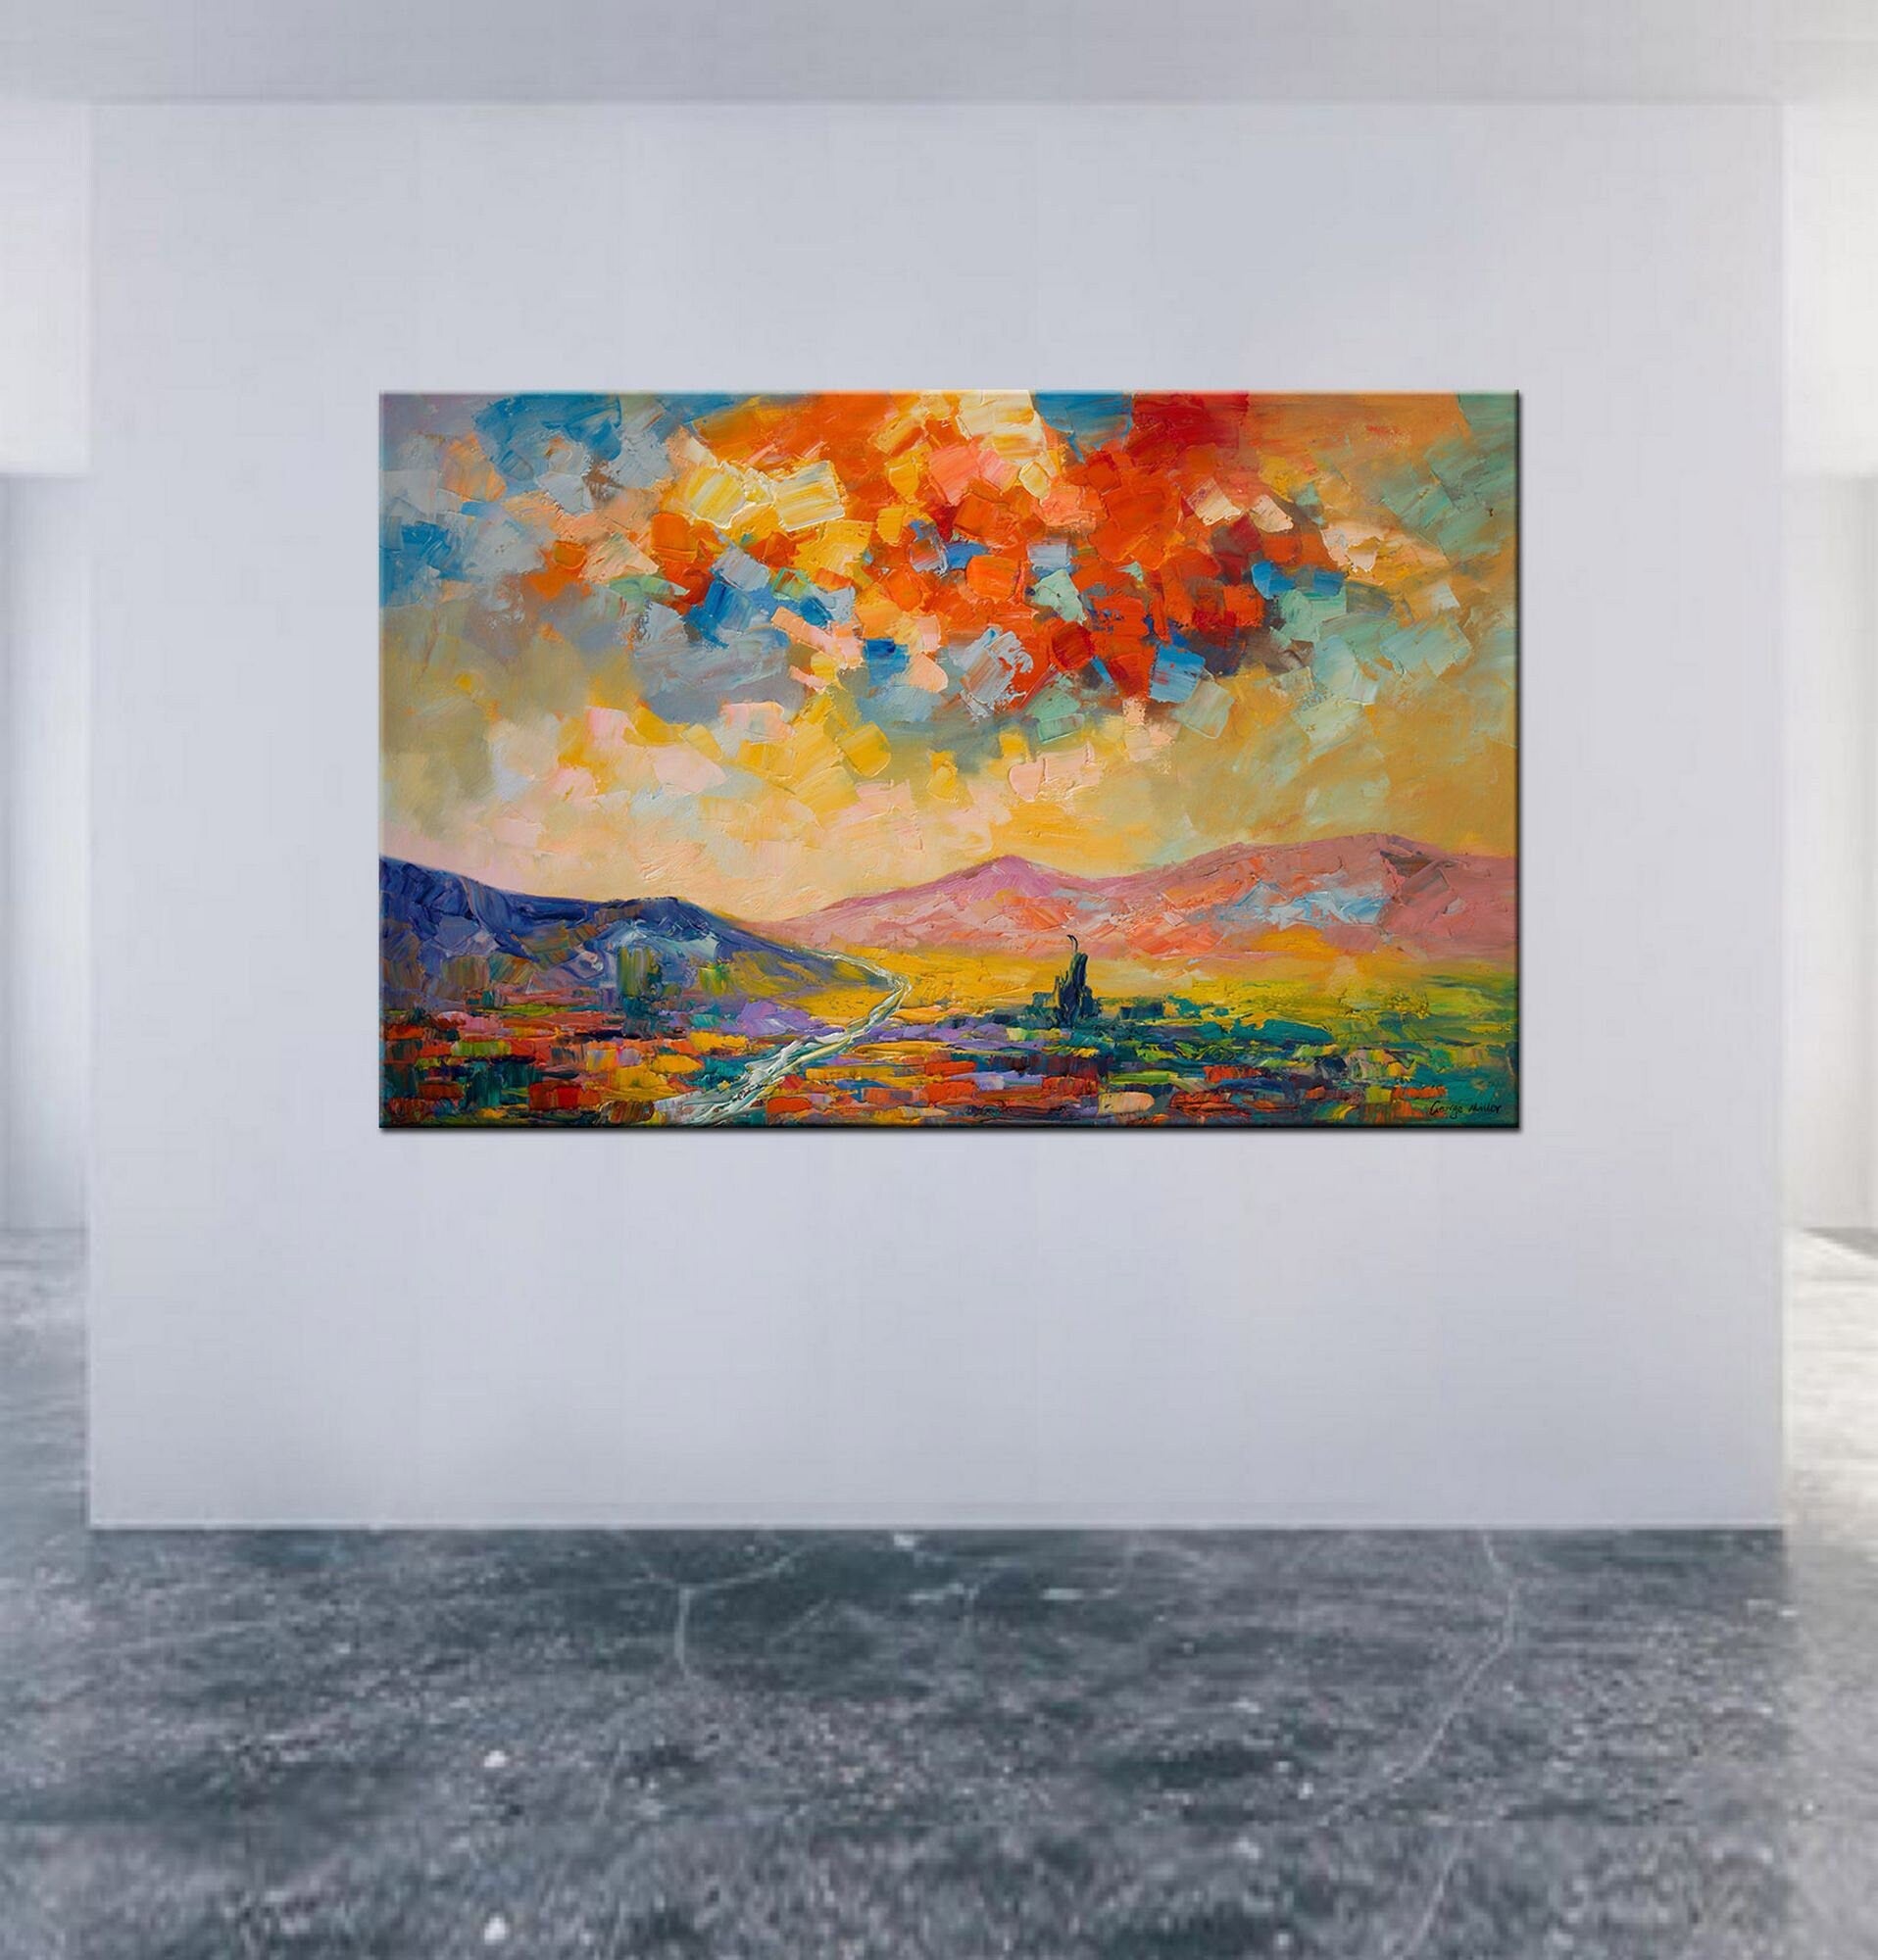 Large Landscape Oil Painting, Contemporary Painting, Large Art, Original Art, Living Room Decor, Abstract Canvas Art, Family Wall Decor